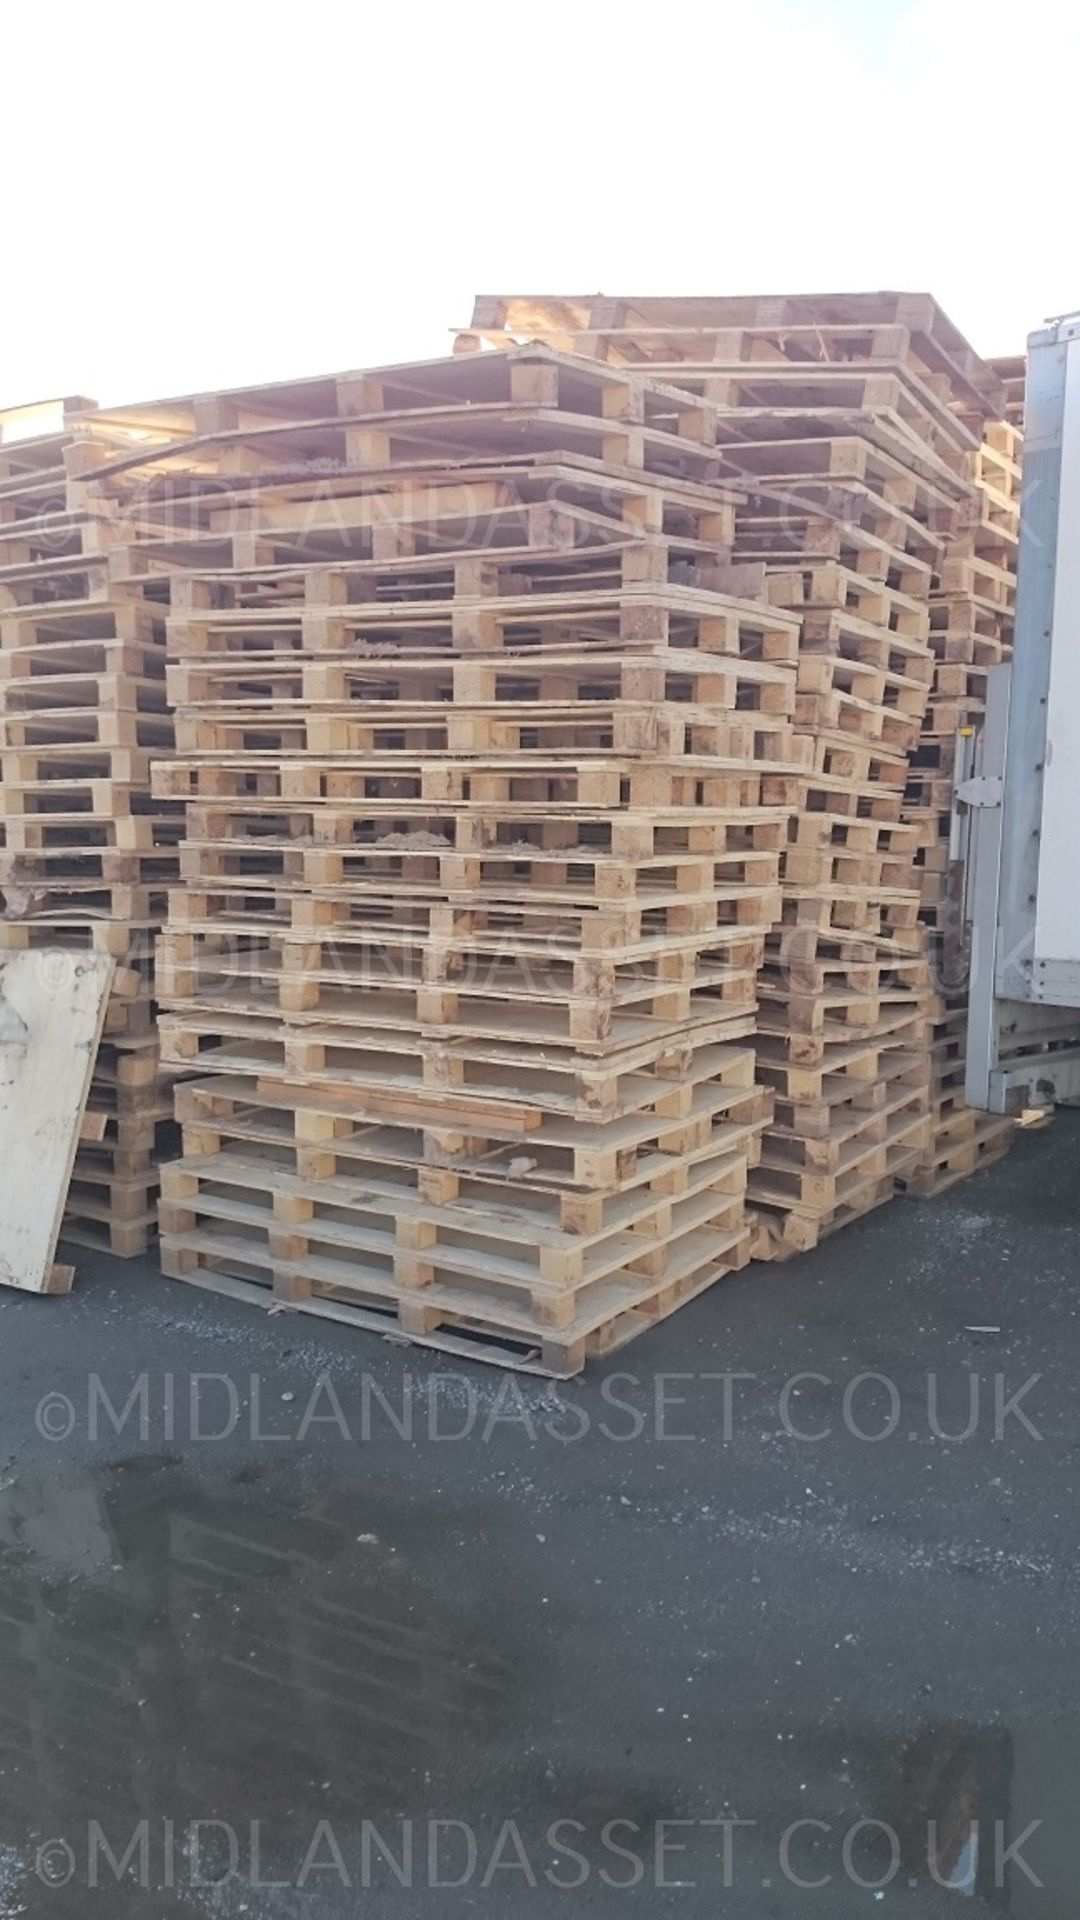 PLY TOP PALLETS - 400 IN TOTAL!